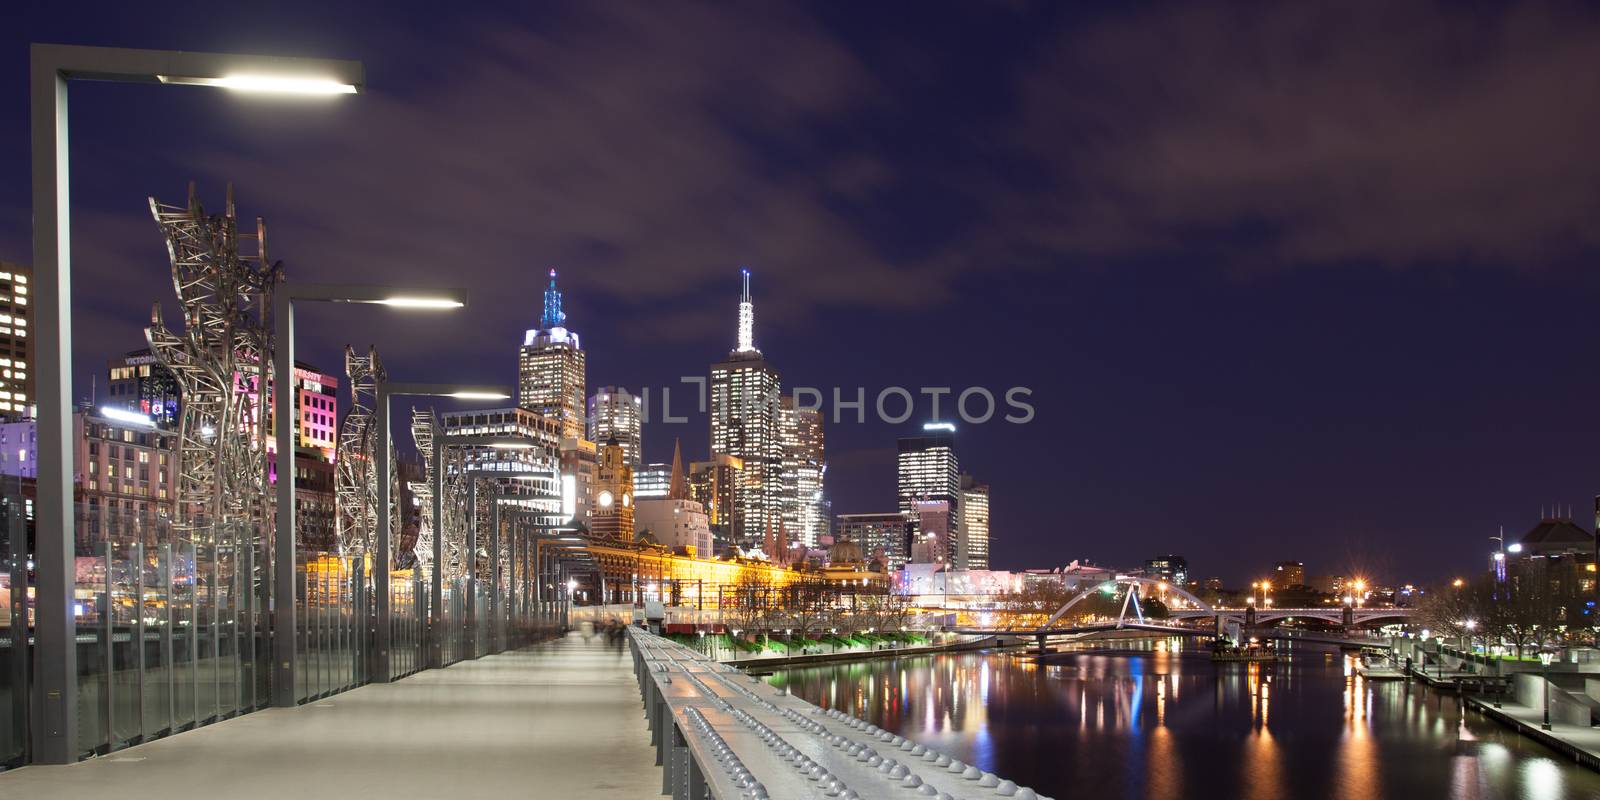 Melbourne skyline as seen at dusk from Queens Bridge near Southbank in Melbourne, Victoria, Australia